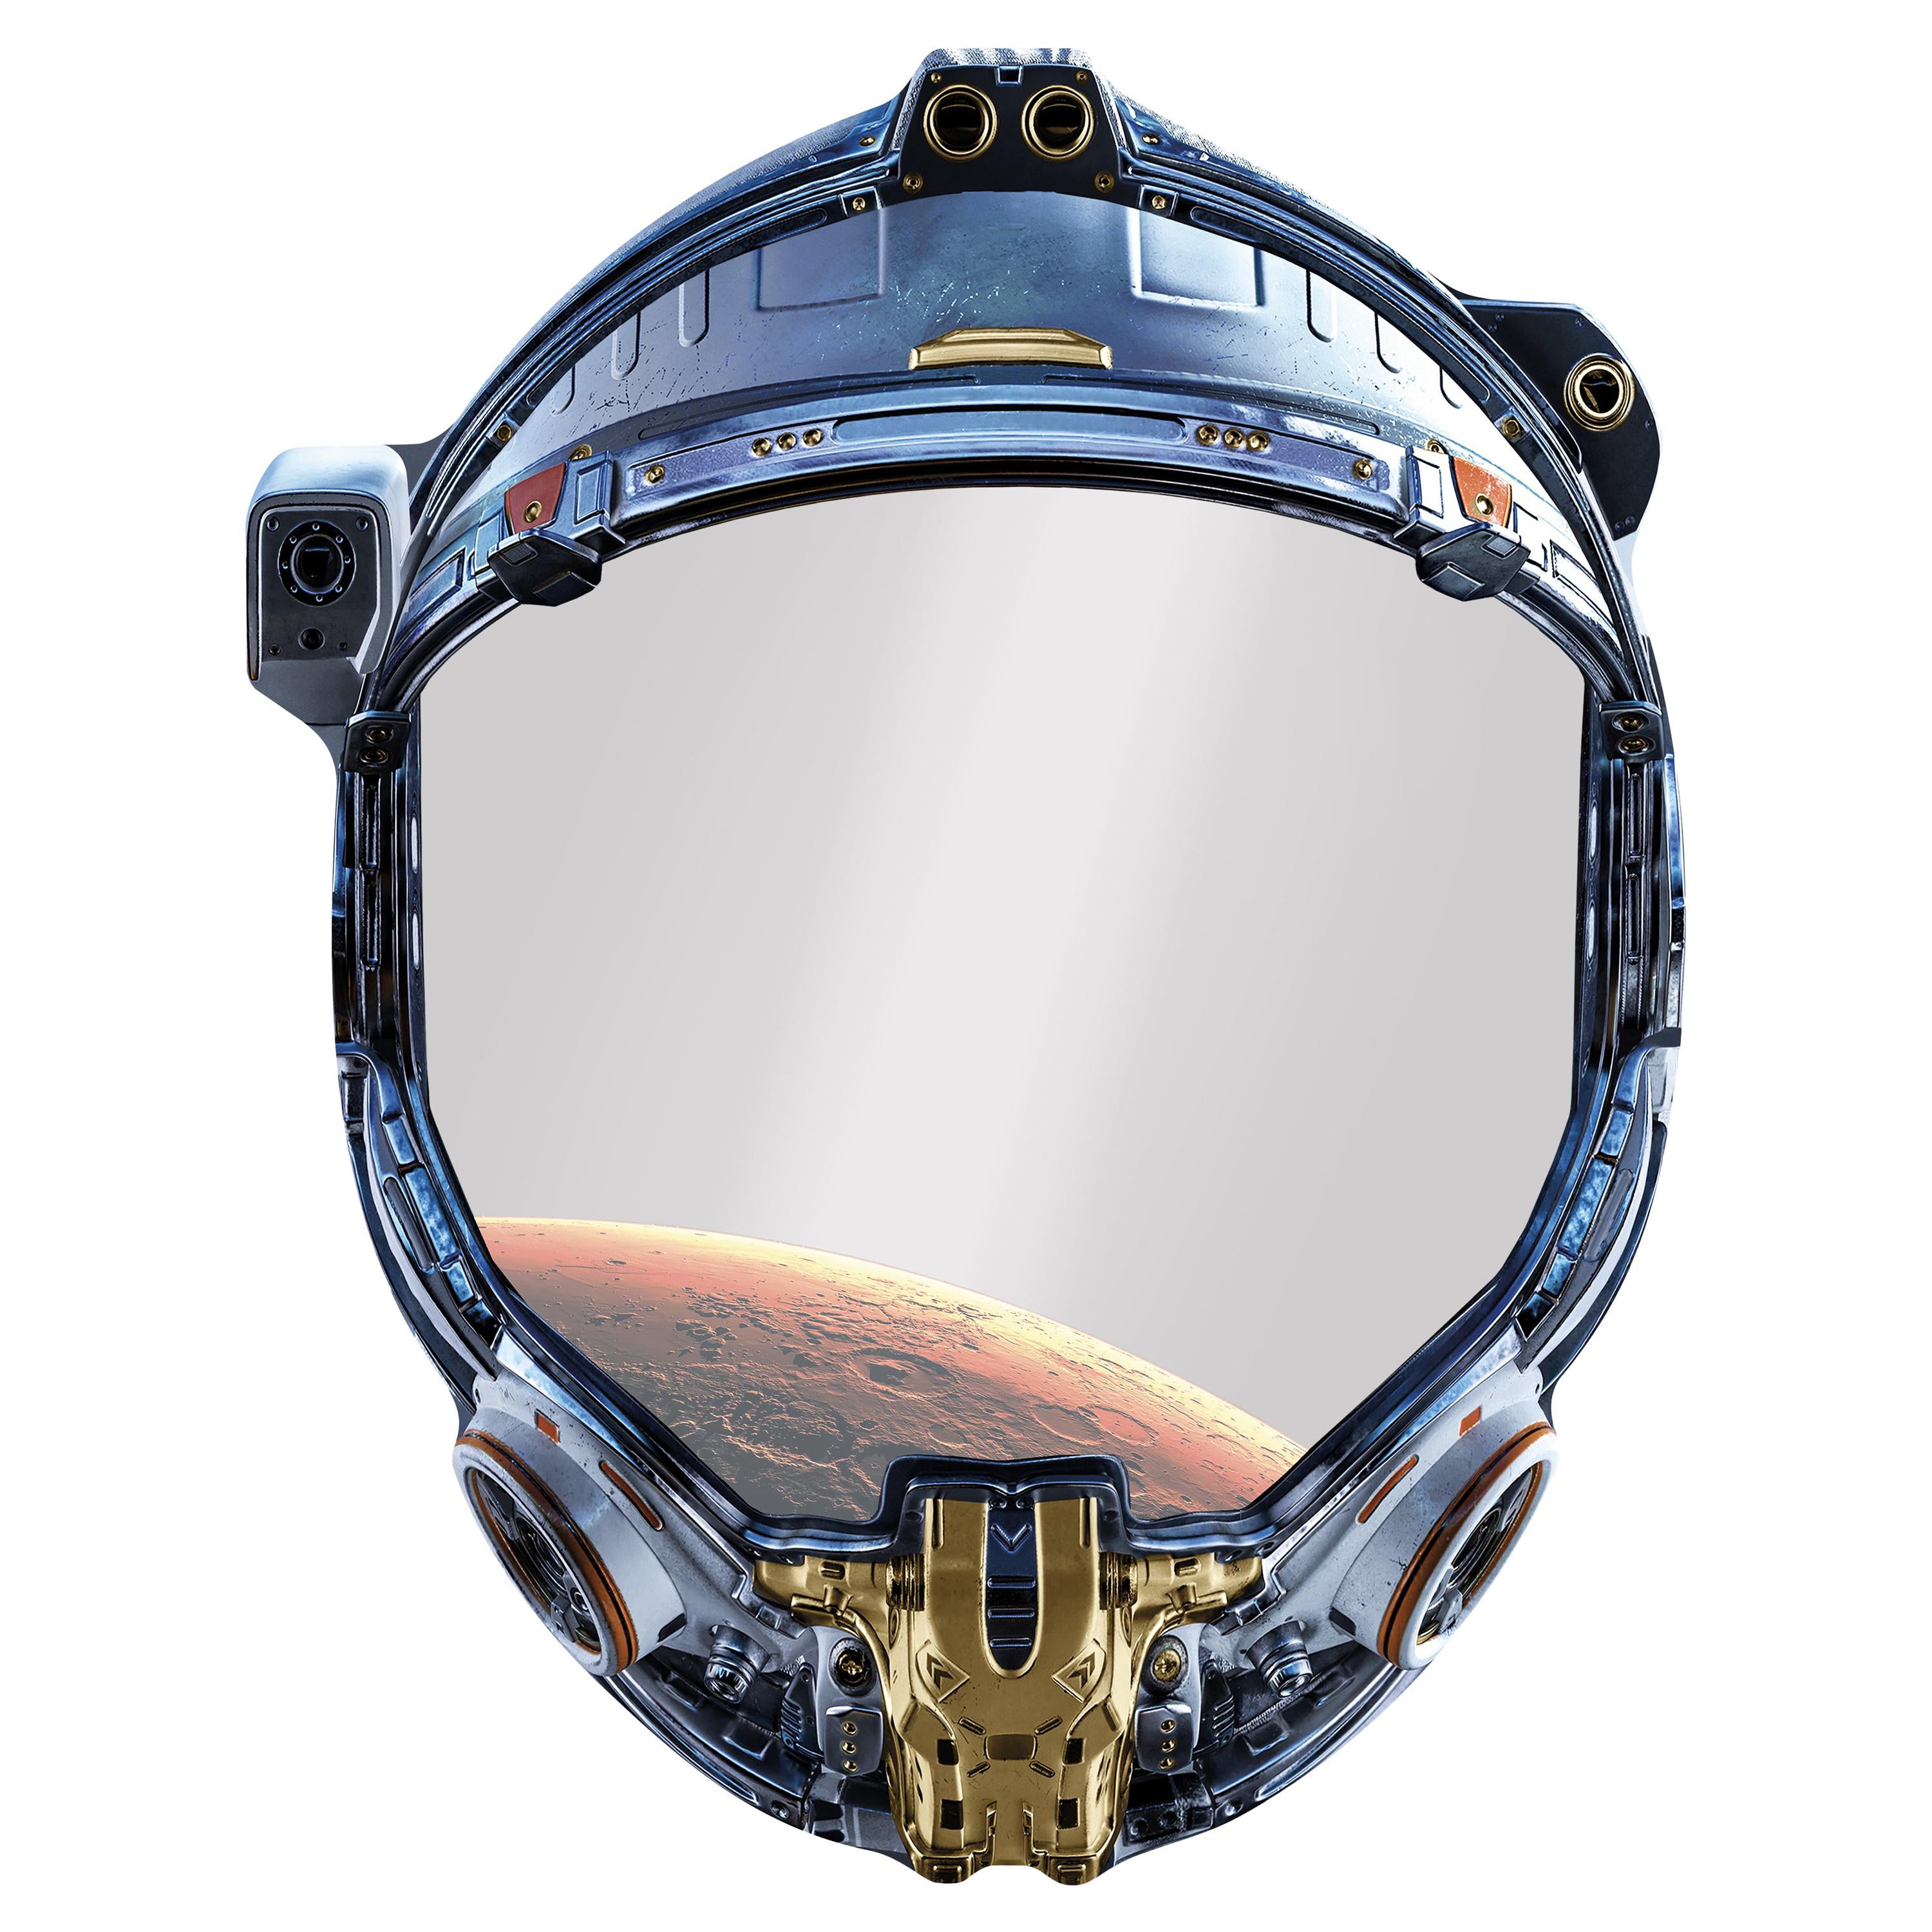 Space Cowboy N°9/30, Contemporary Wall Mirror with Printed Astronaut Helmet